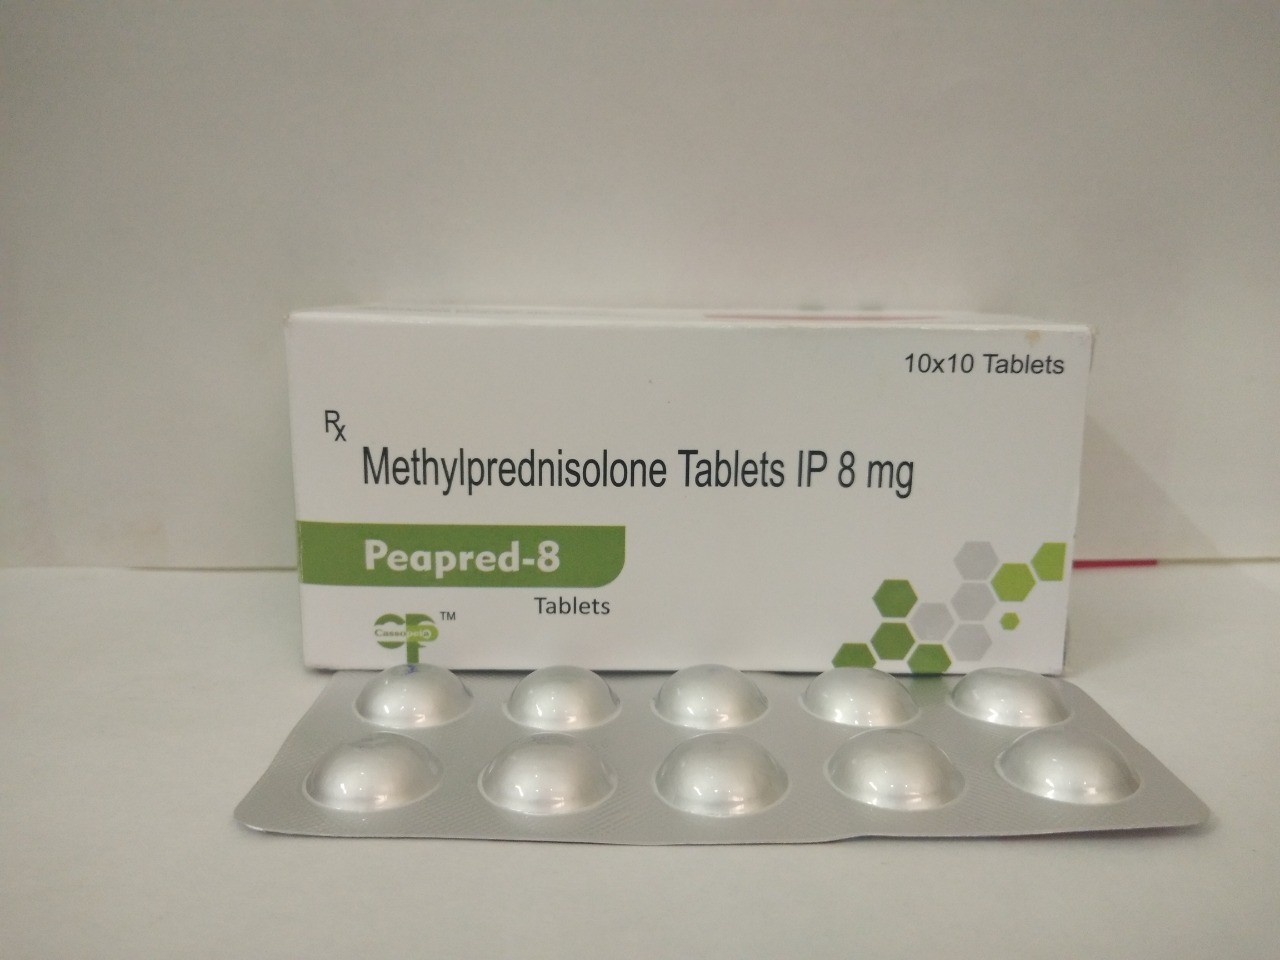 Product Name: Peapred 8, Compositions of Peapred 8 are Methylprednisolone Tablets IP 8mg - Cassopeia Pharmaceutical Pvt Ltd